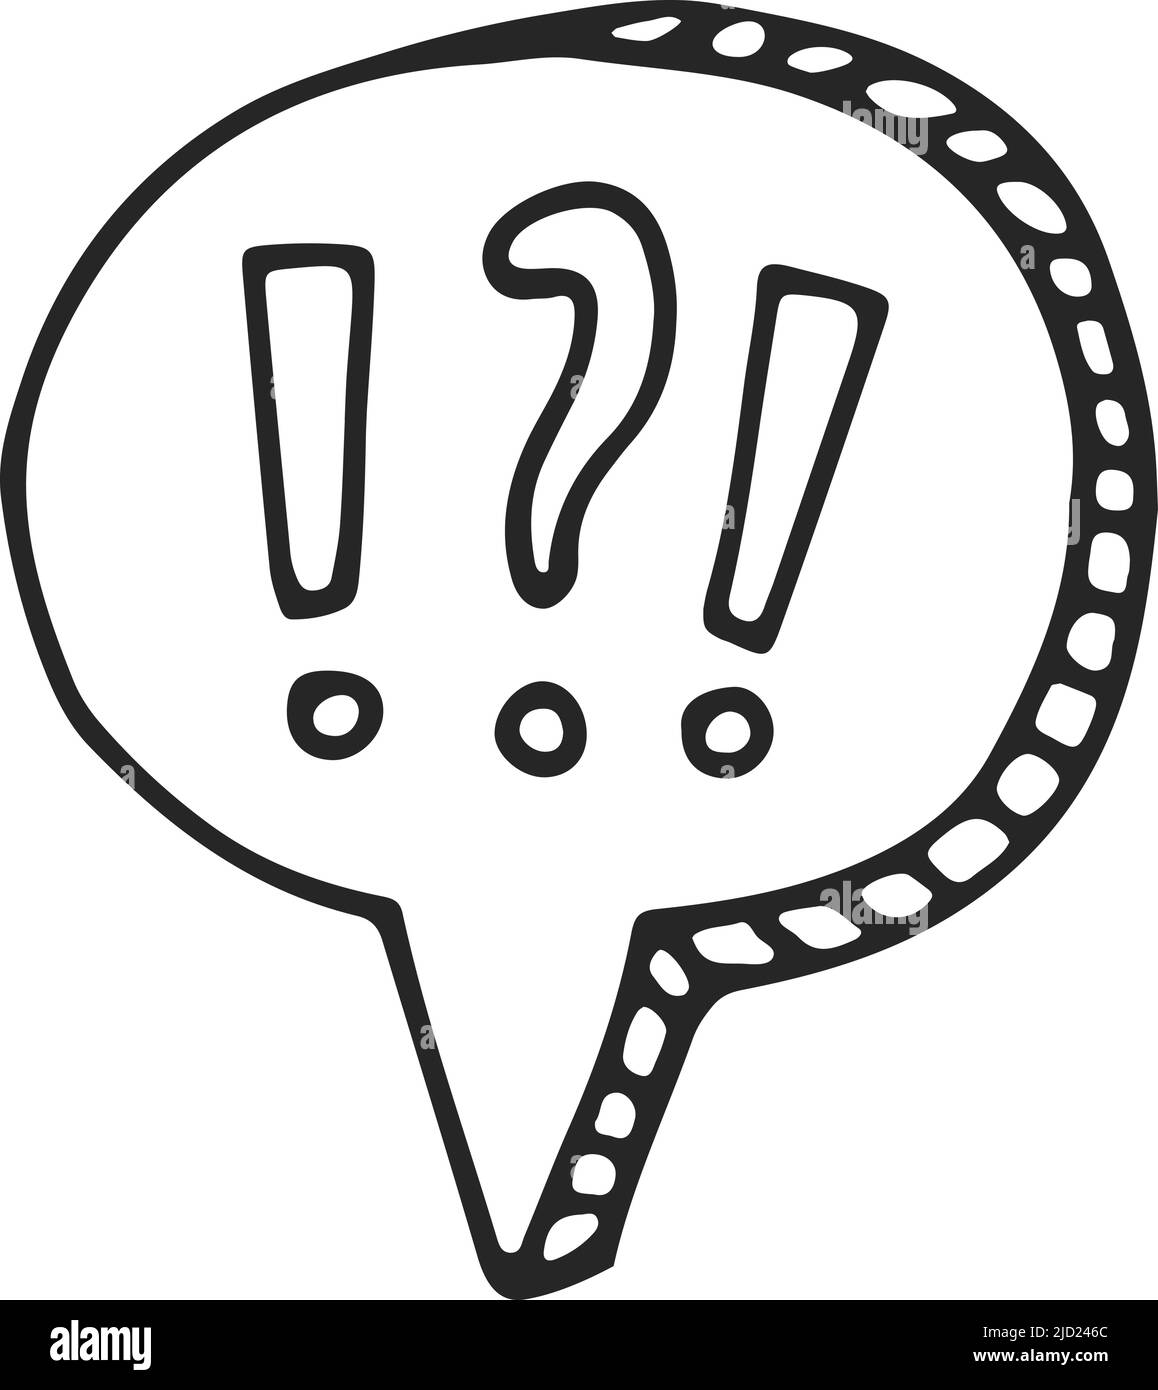 Surprise speech bubble with exlamation and question marks Stock Vector